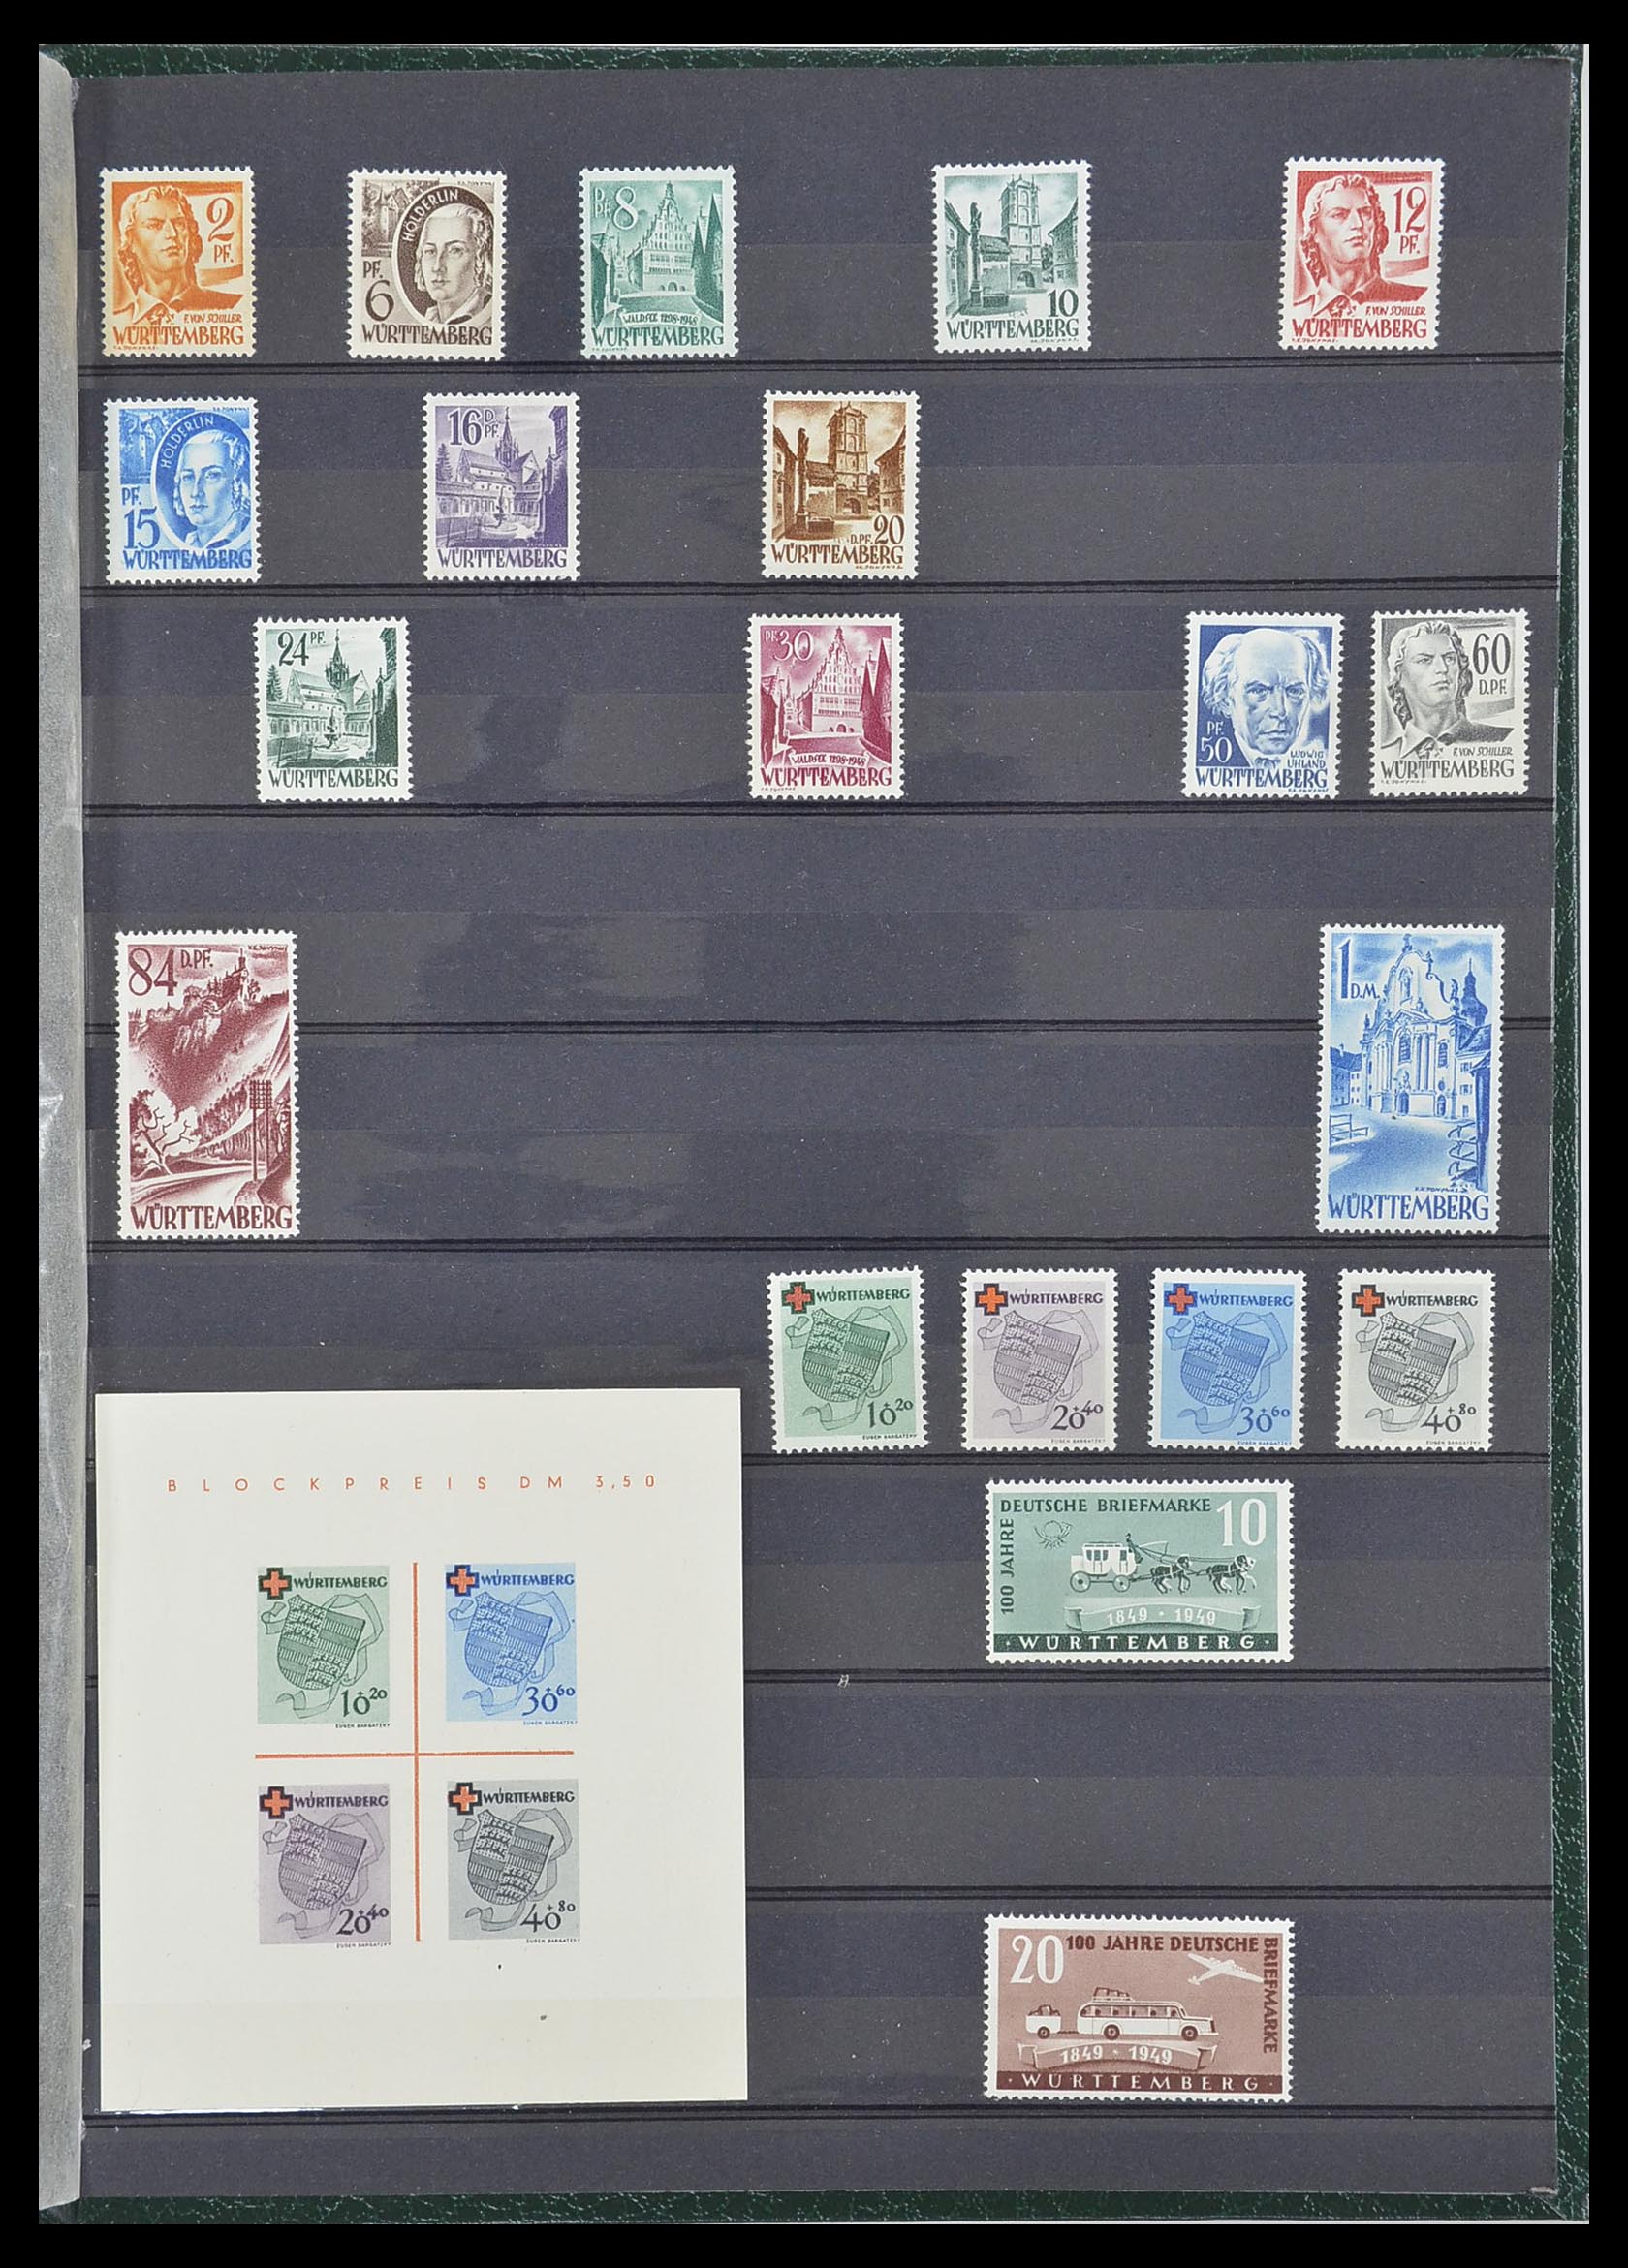 33553 081 - Stamp collection 33553 German territories and occupations 1939-1948.